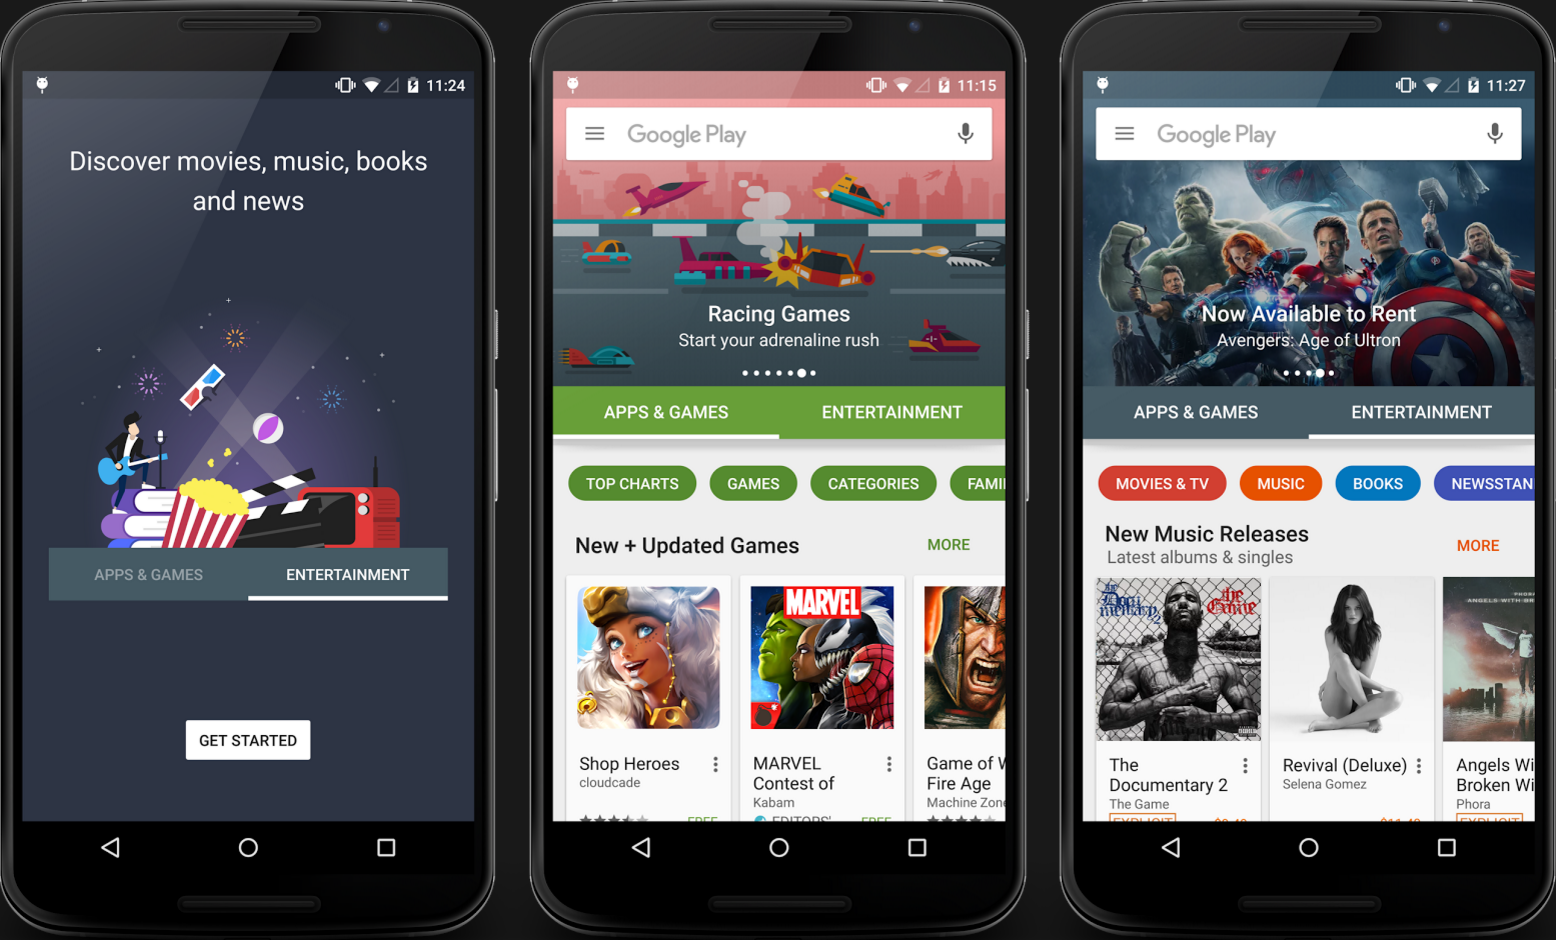 how to google play store download